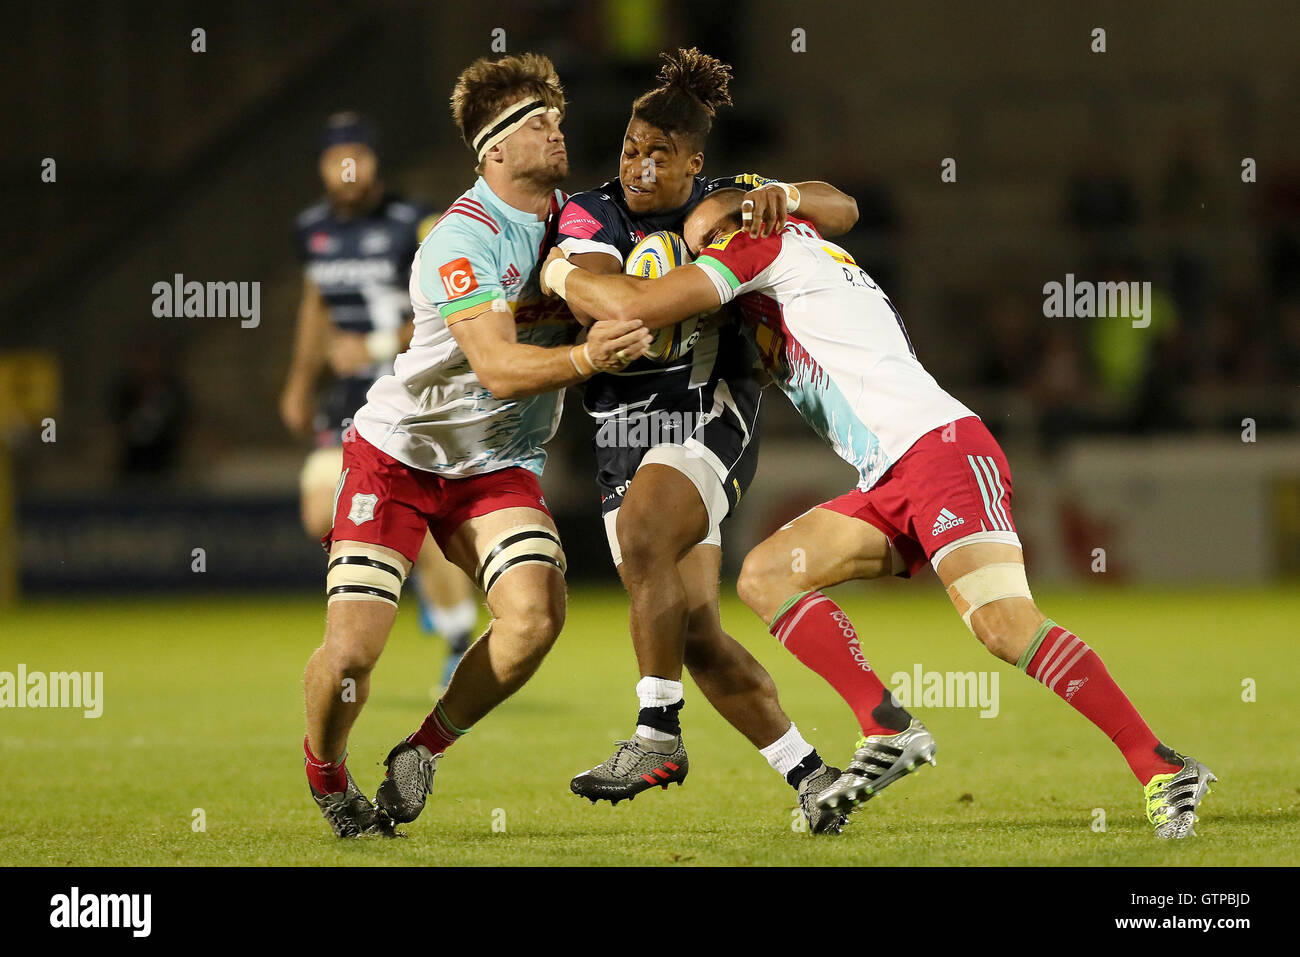 Sale Sharks Paolo Odogwu is tackled by Harlequins Jack Clifford (left) and Ross Chisholm (right), during the Aviva Premiership match at the AJ Bell Stadium, Salford Stock Photo